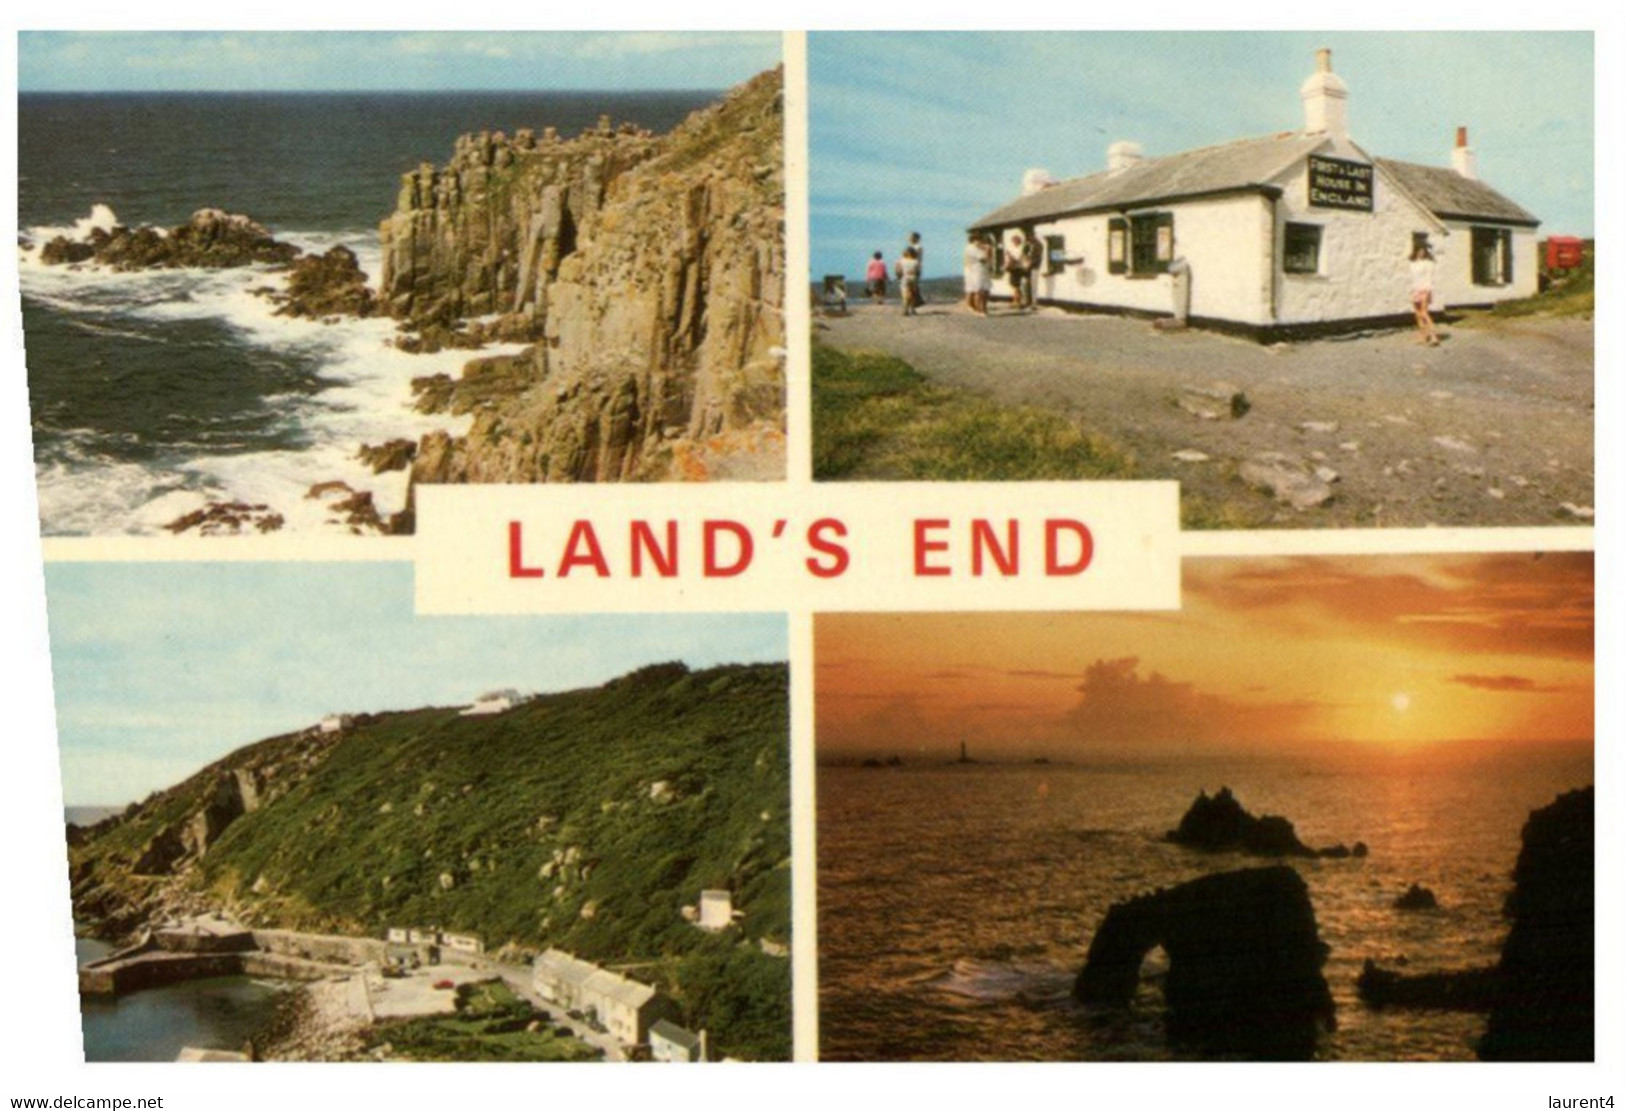 (X 13) UK - Land's End - Land's End